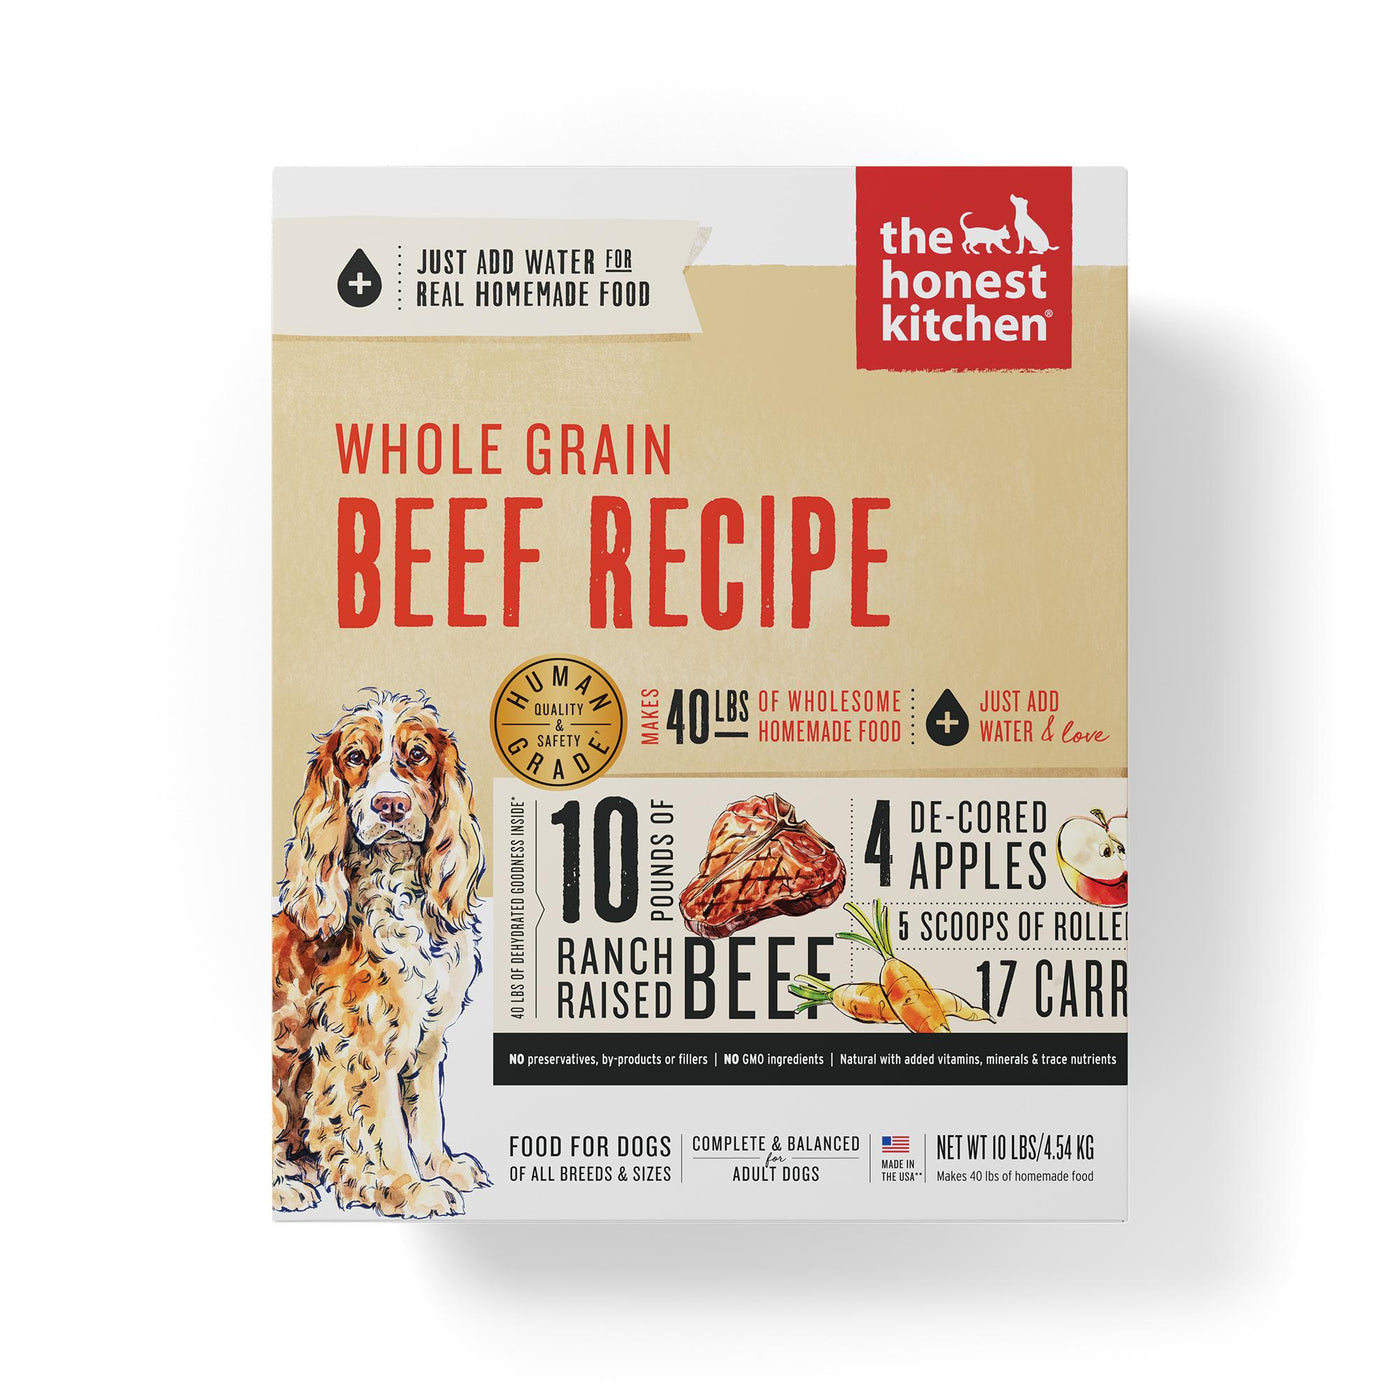 The Honest Kitchen Whole Grain Beef Recipe Dehydrated Dog Food 10 lb